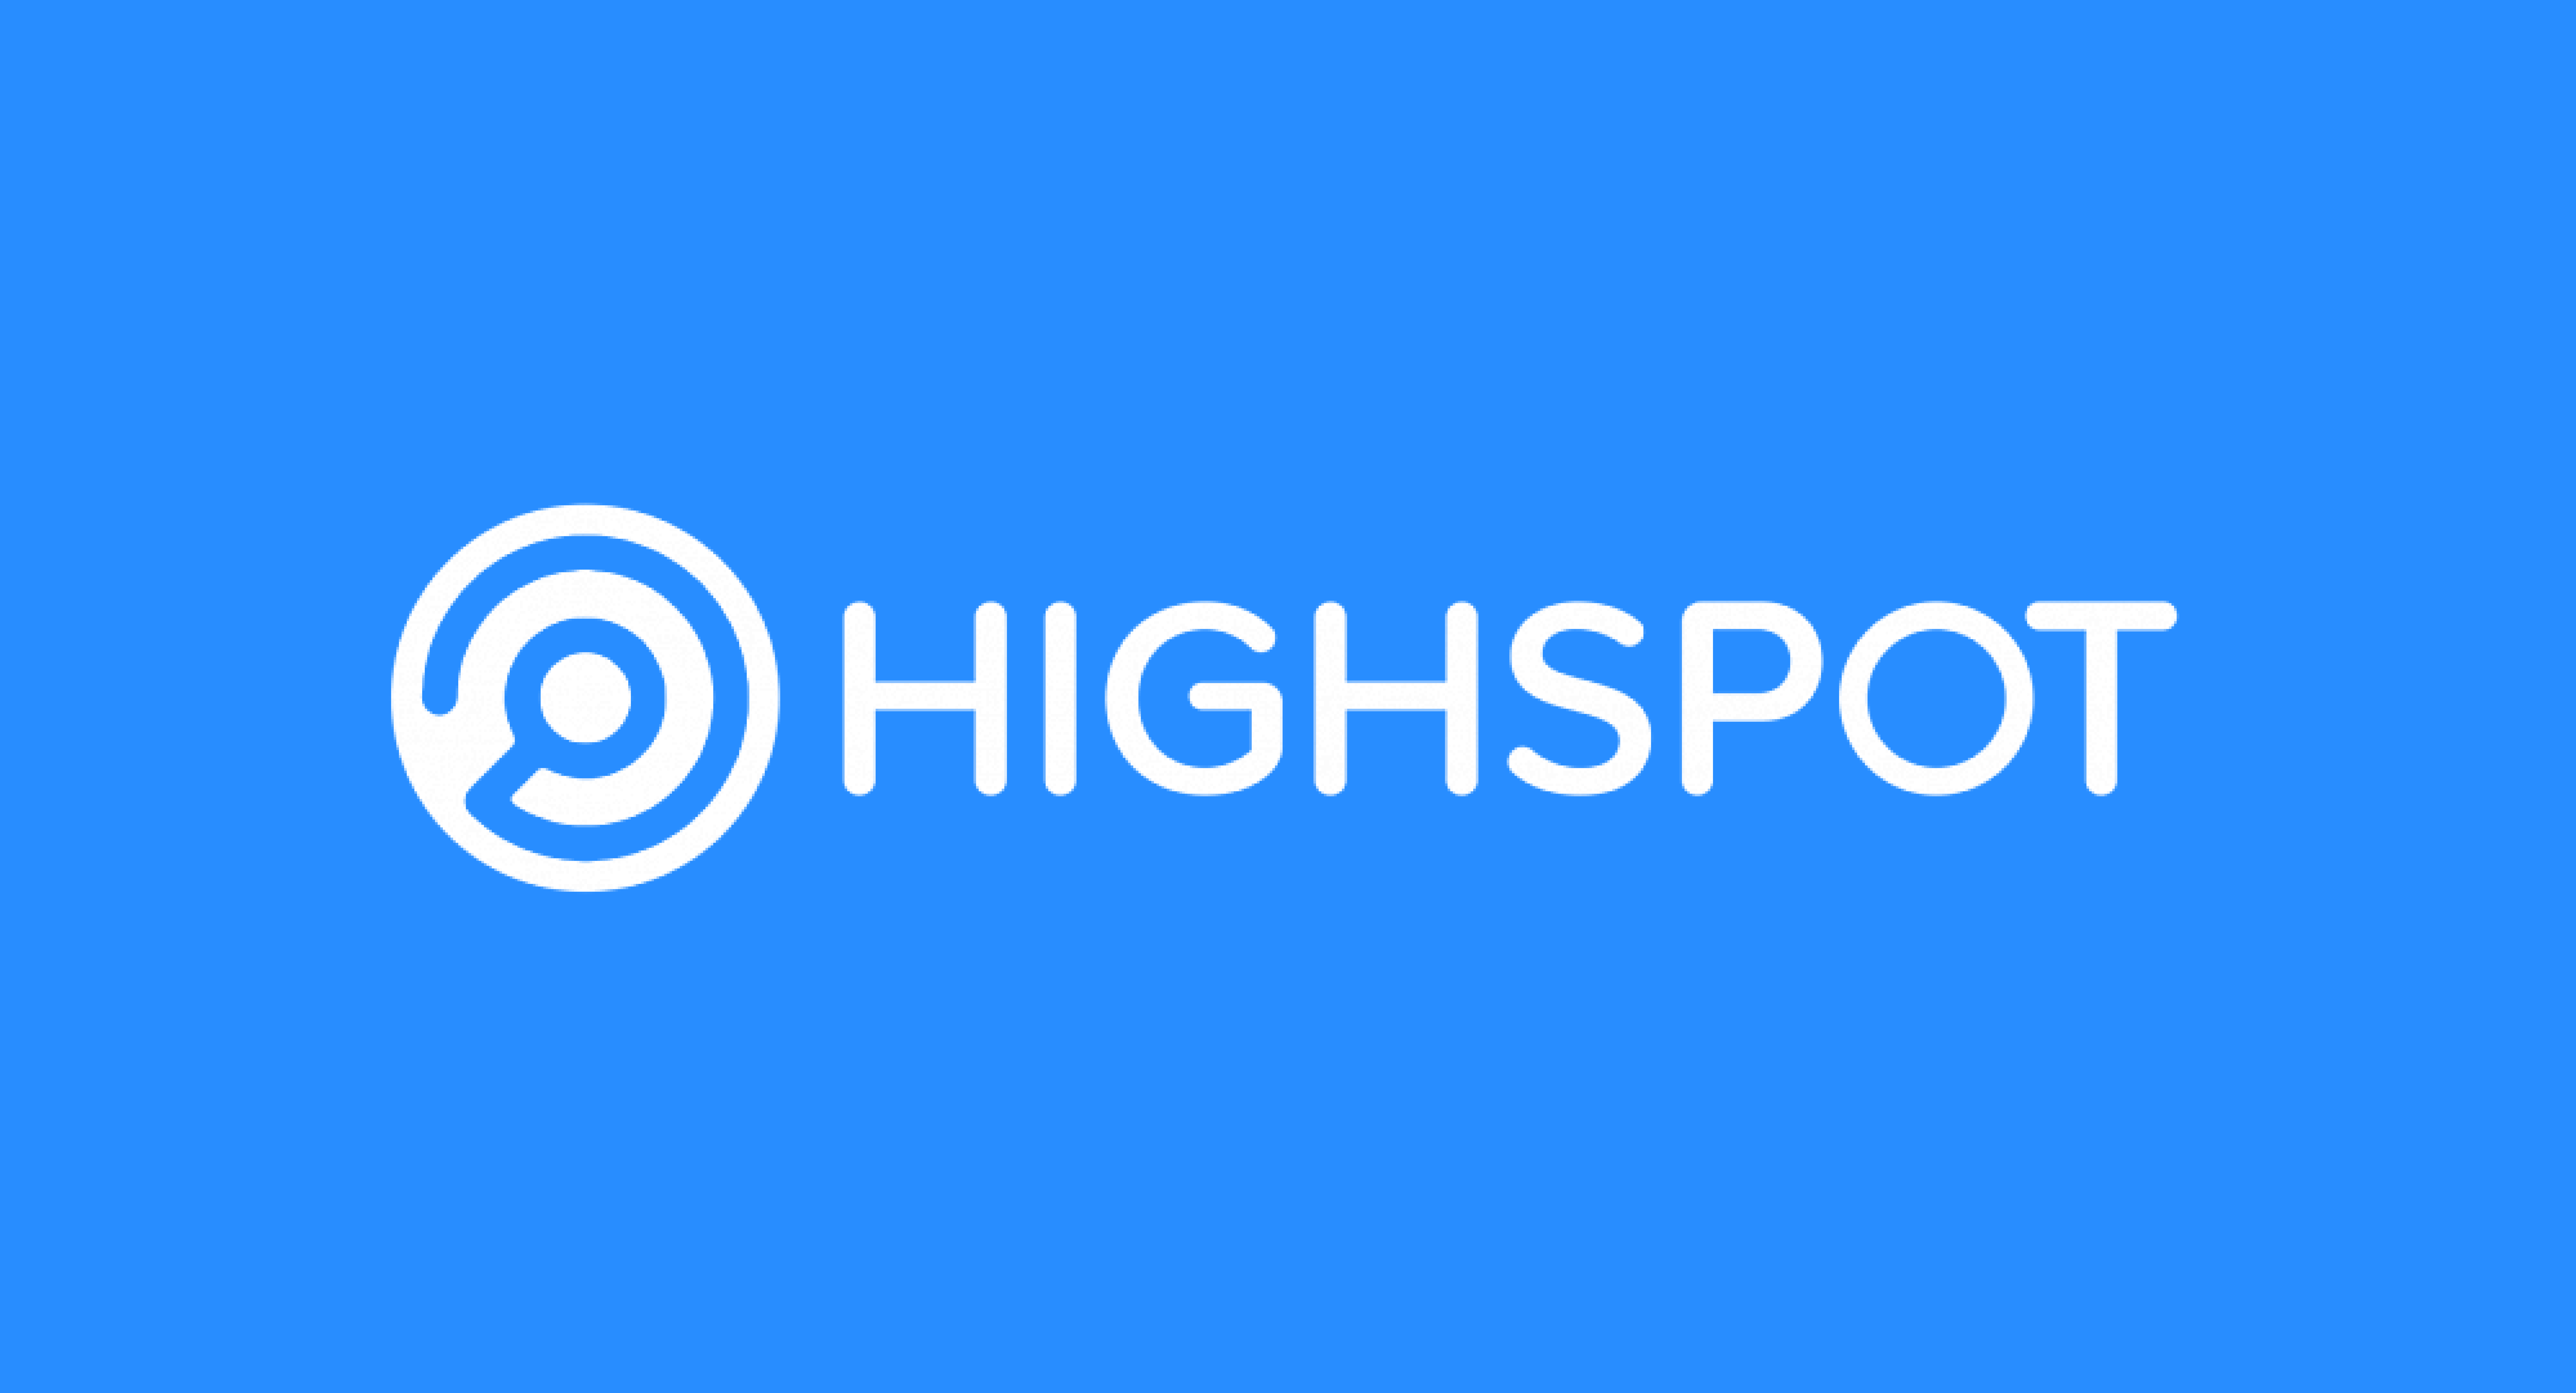 85% of Highspot’s Closed Gained Alternatives Influenced by G2